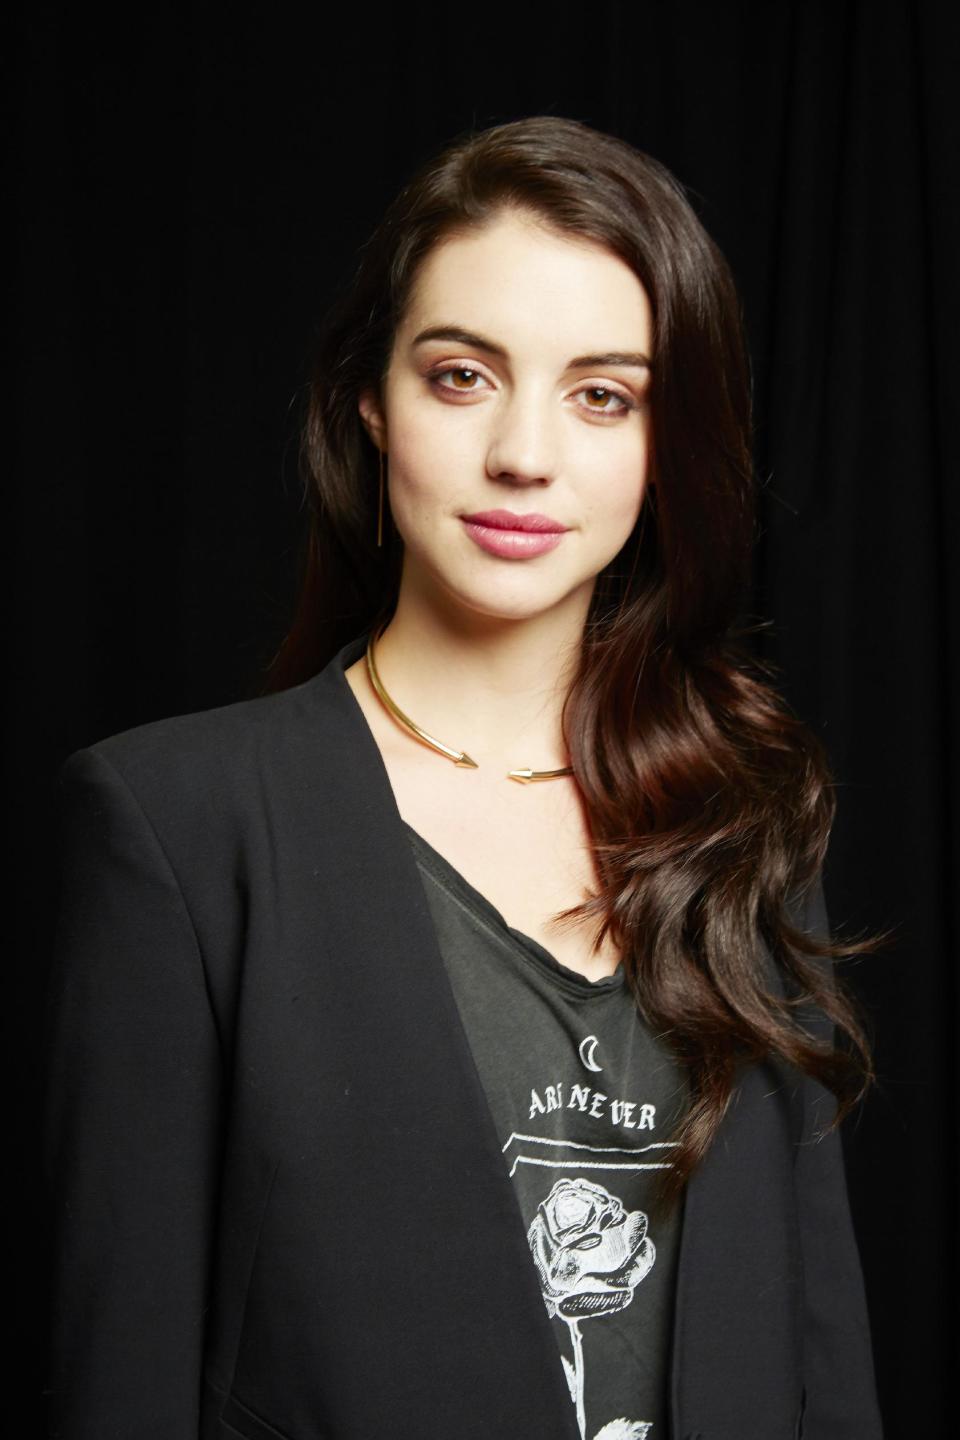 In this Monday, Oct. 14, 2013 photo, actress Adelaide Kane of the new series "Reign," poses for a portrait in New York. Kane stars as Mary, Queen of Scots. The series premieres on Thursday, Oct. 17 at 9 p.m. EST on The CW. (Photo by Dan Hallman/Invision/AP)